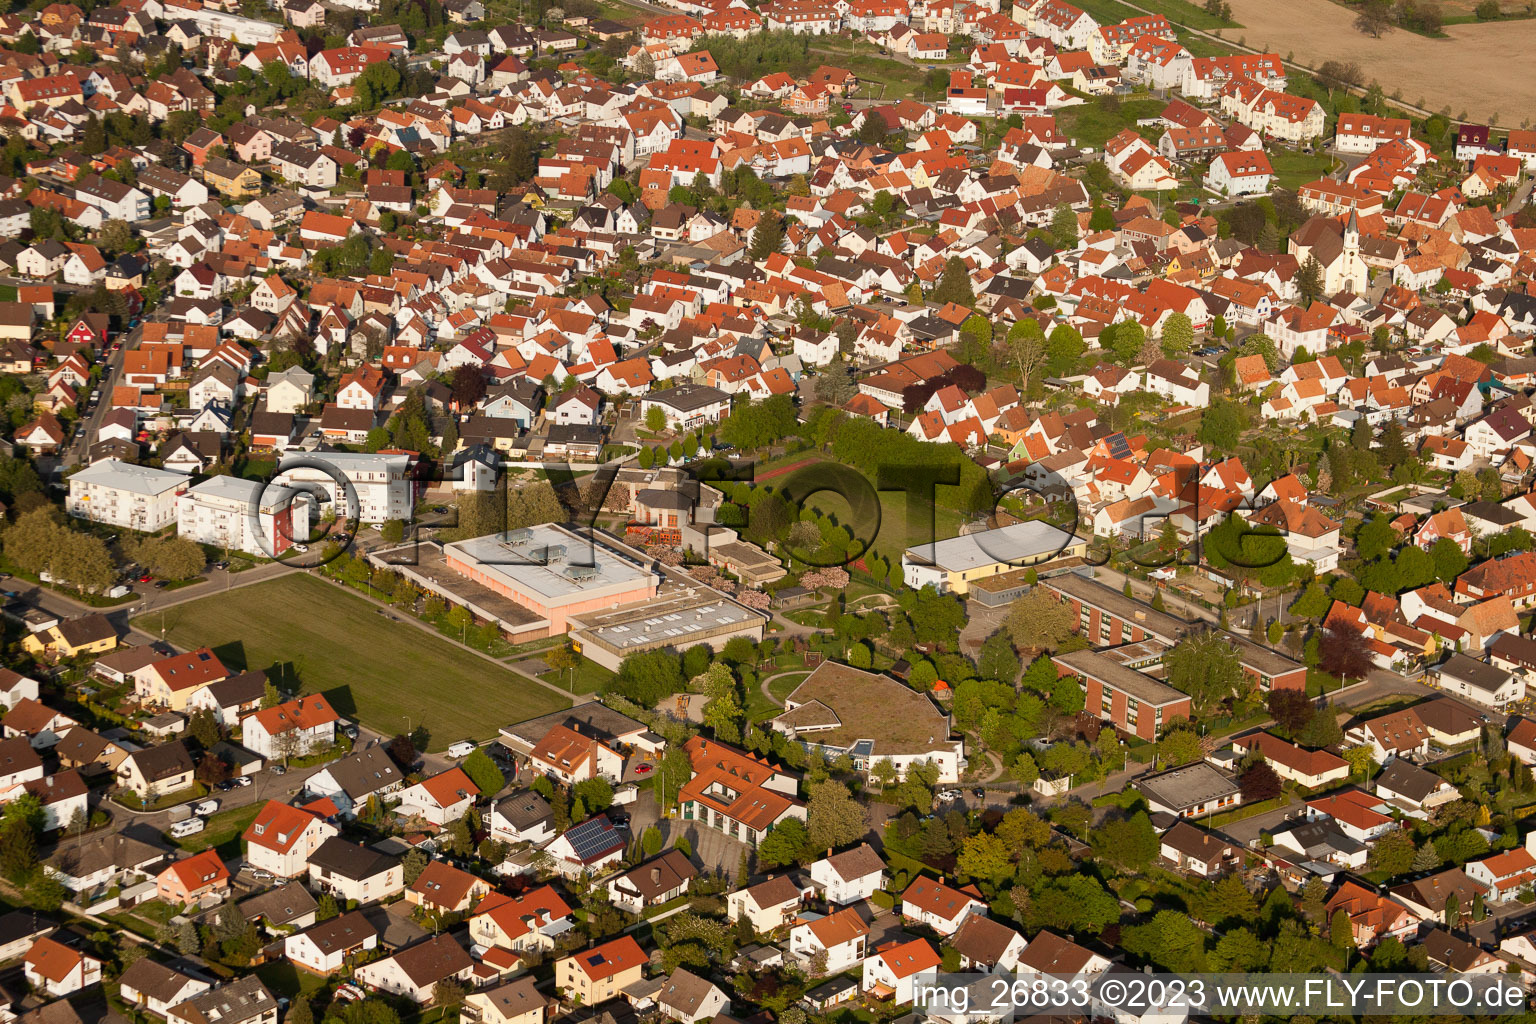 District Maximiliansau in Wörth am Rhein in the state Rhineland-Palatinate, Germany seen from above